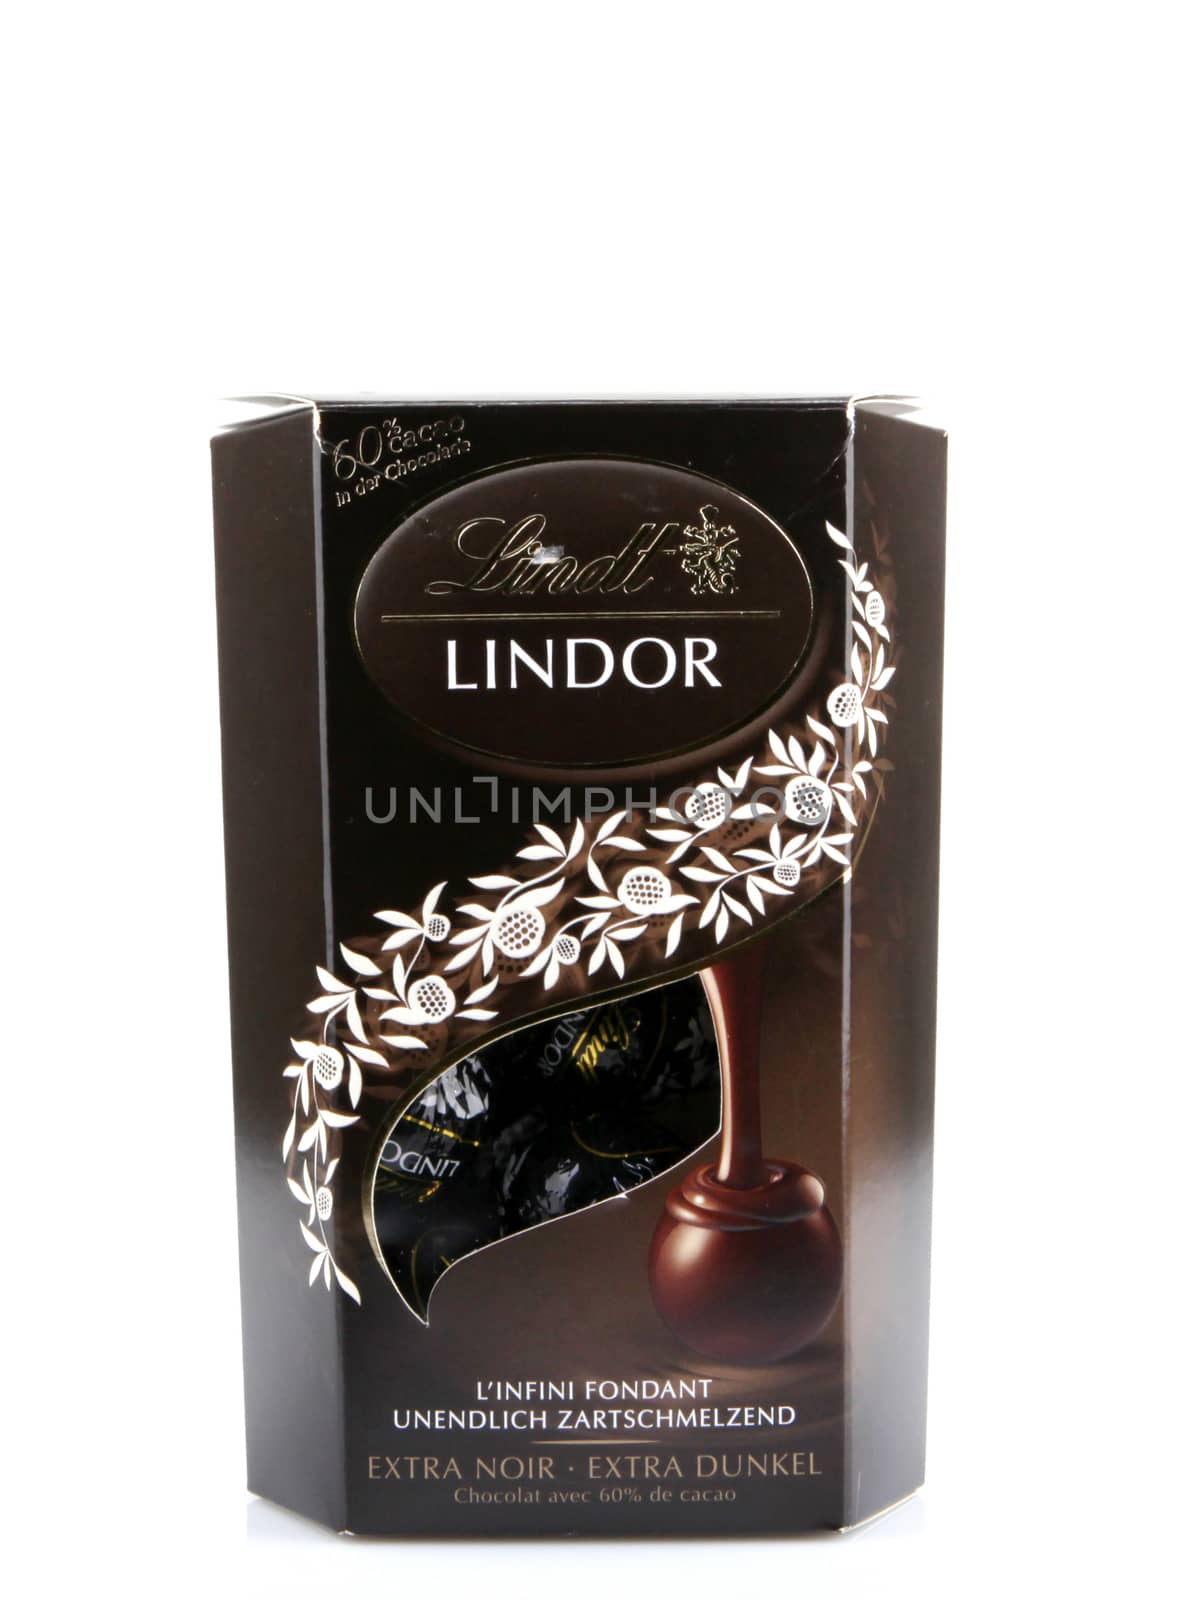 AYTOS, BULGARIA - APRIL 03, 2016: Milk Chocolate LINDOR truffle. Lindt is recognized as a leader in the market for premium quality chocolate. by nenov